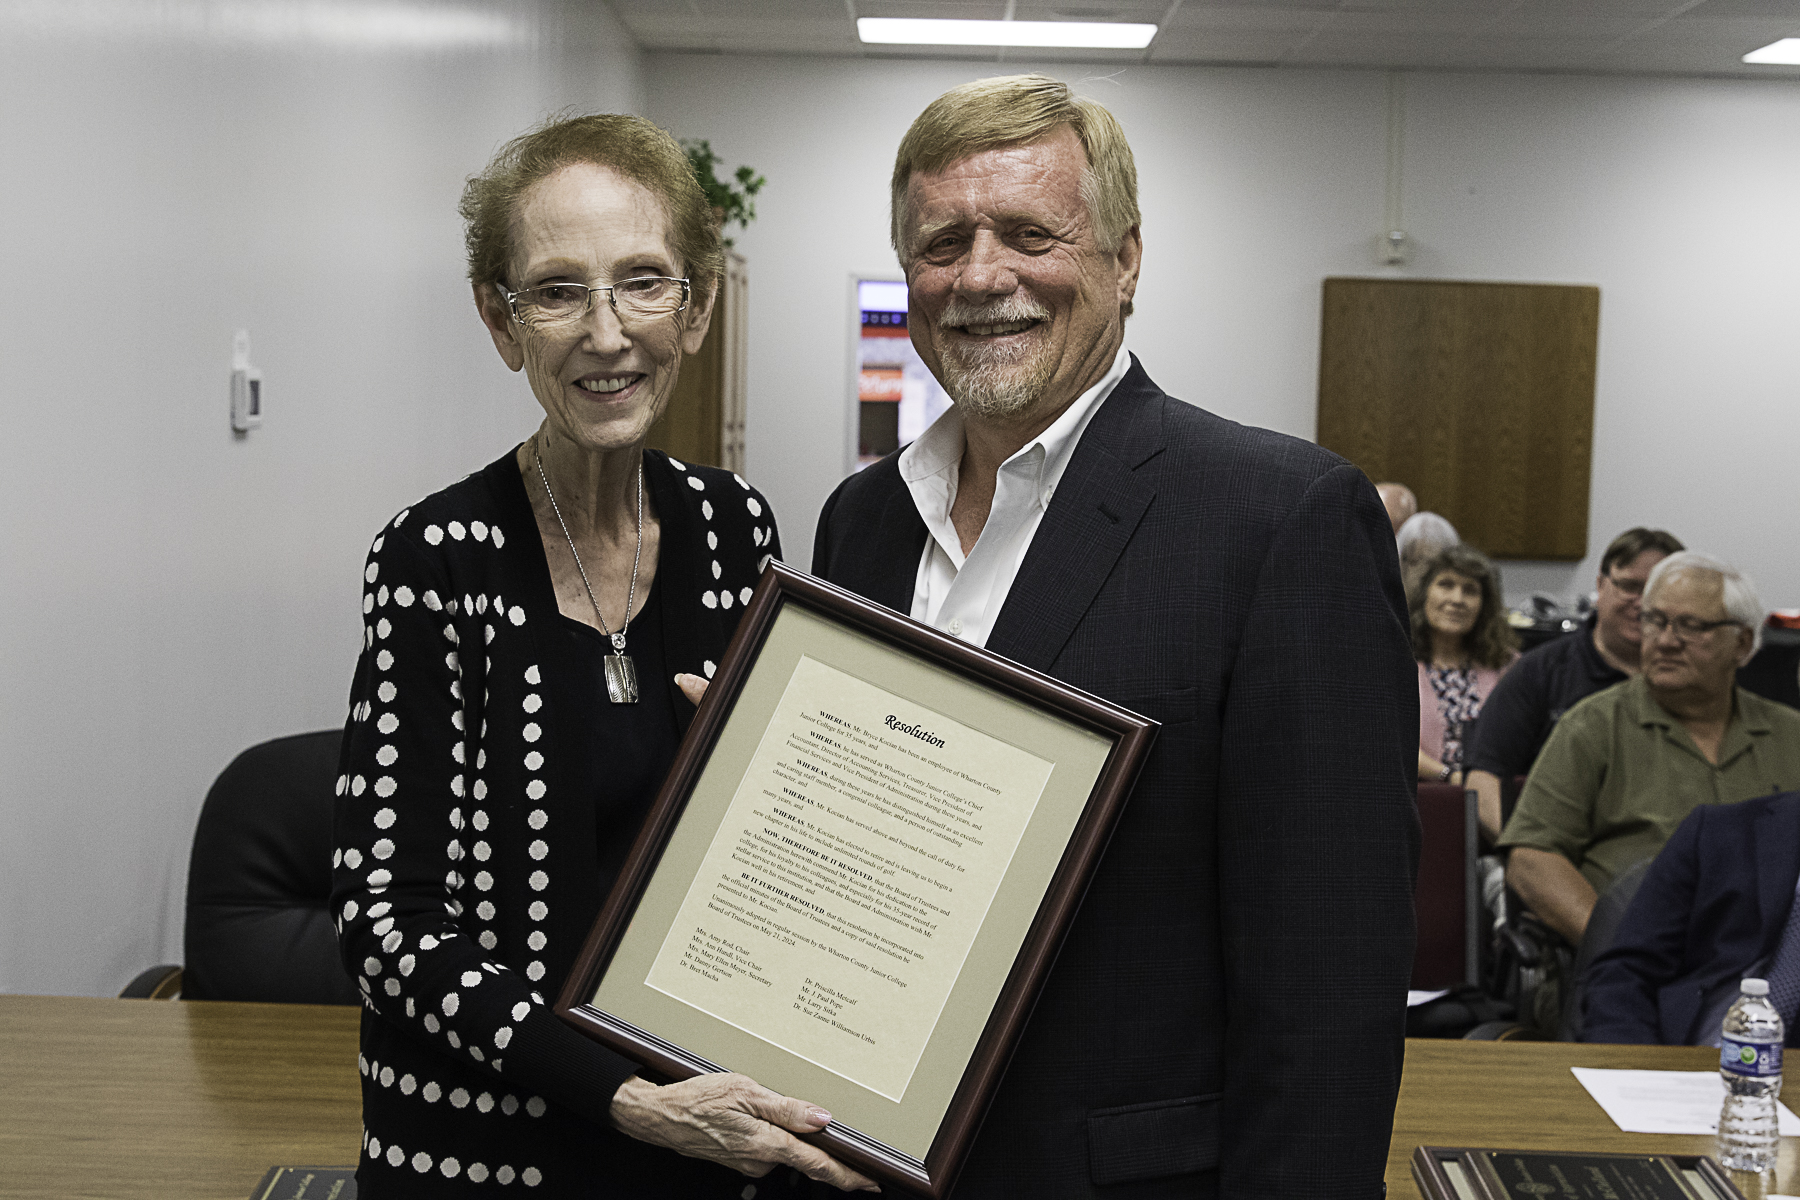 WCJC President Betty McCrohan presents a resolution to Bryce Kocian for his 35 years of service to the college. 